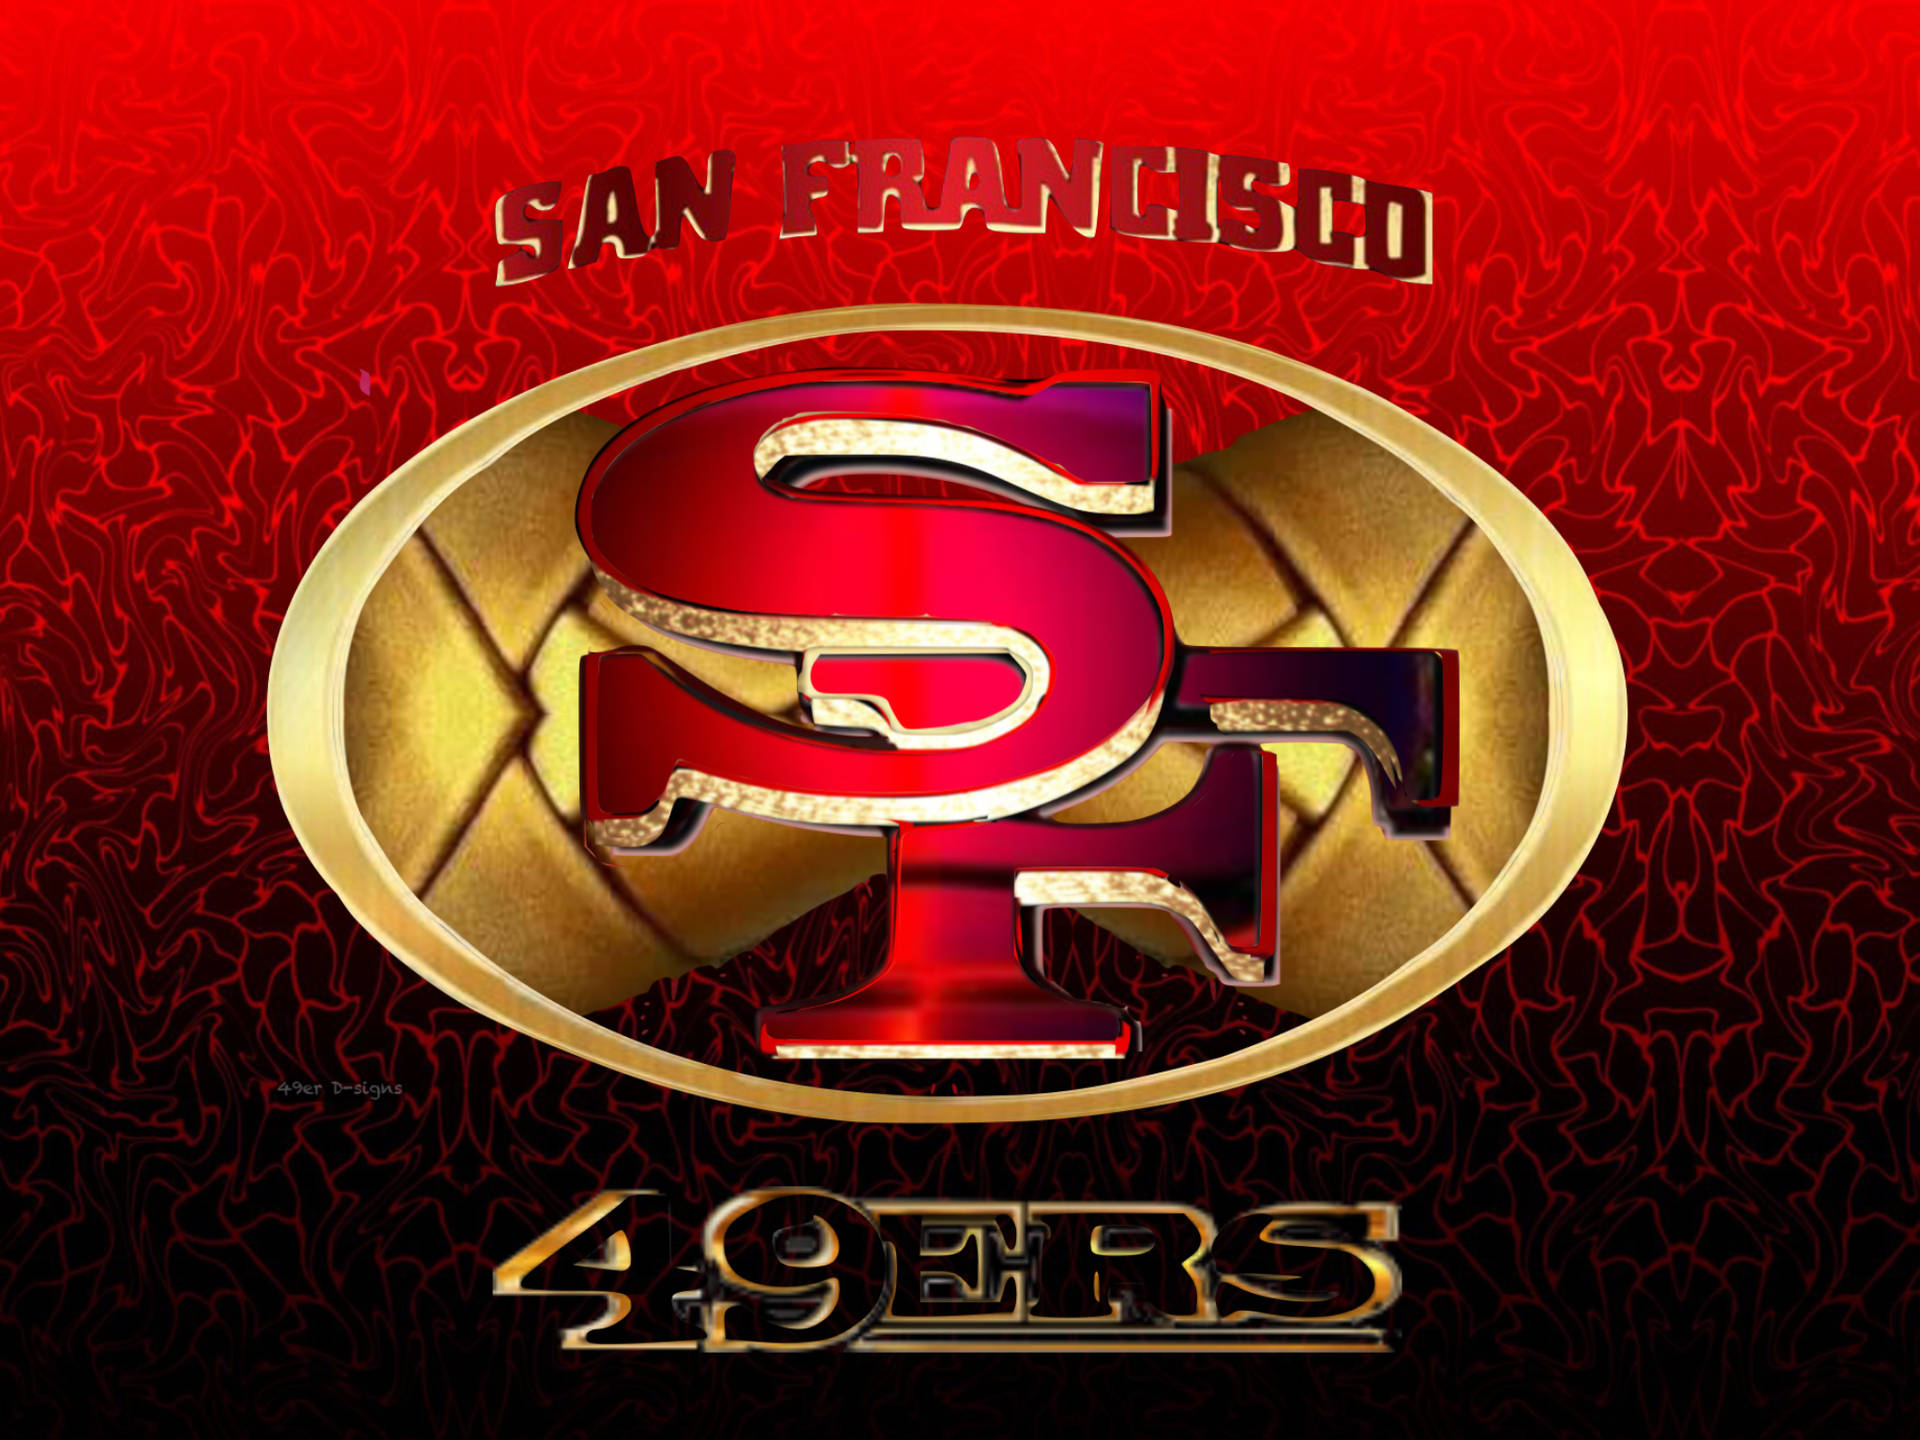 Giants 3D sign ANY number signs art Jersey San Francisco 49ers